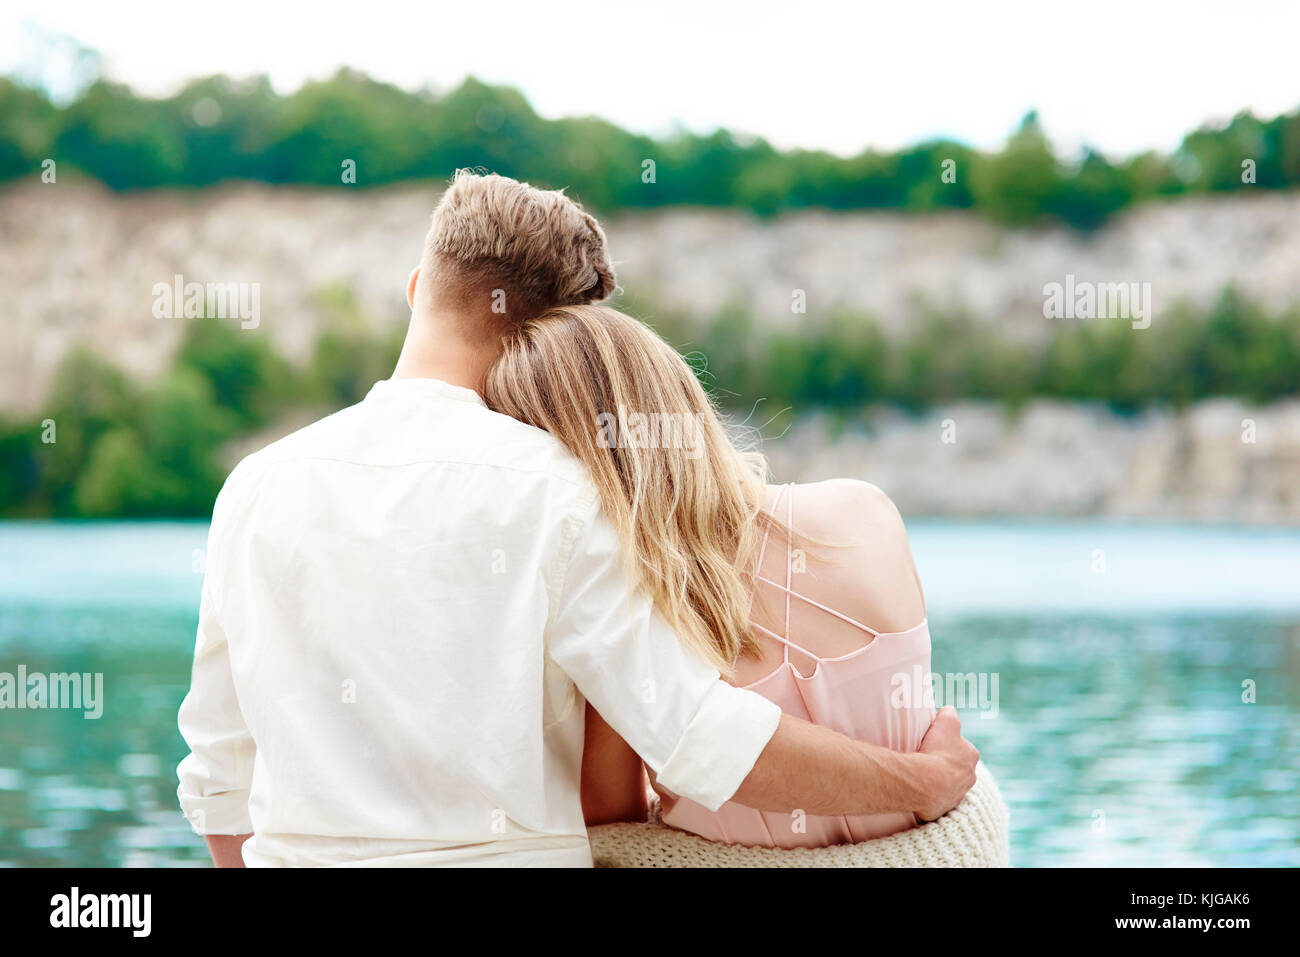 Affectionate couple embracing and admiring scenery, Krakow, Malopolskie, Poland Stock Photo